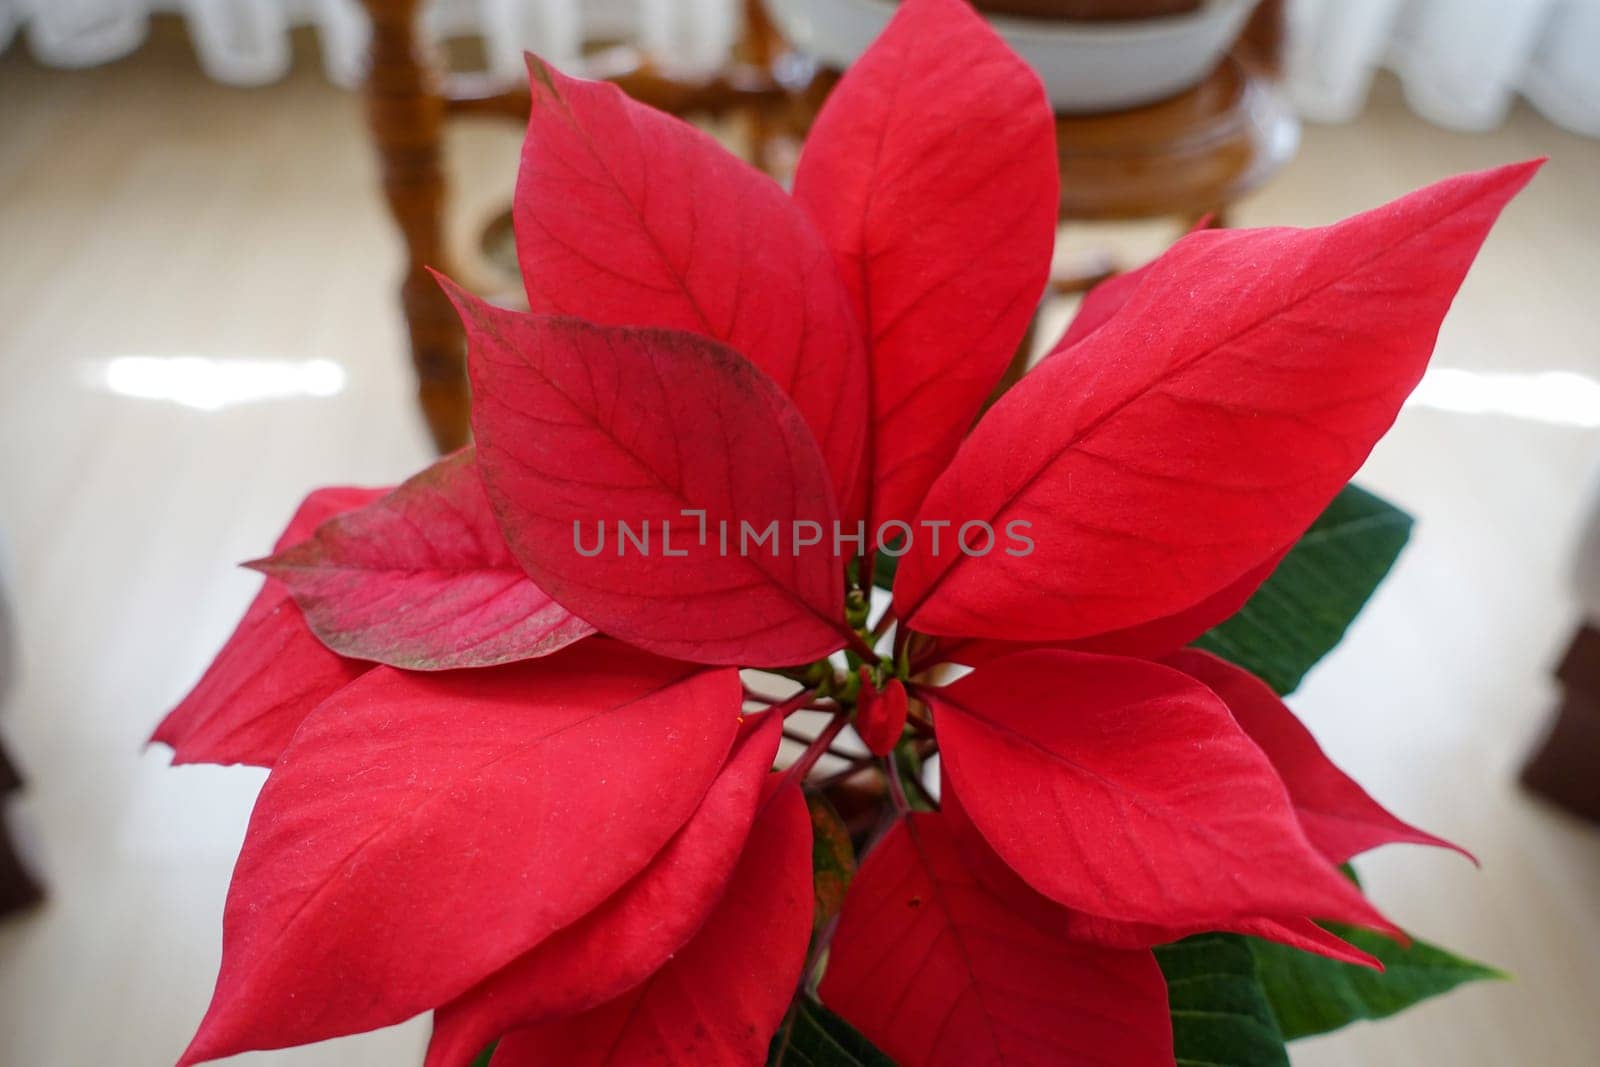 ornamental flowers Poinsettia,Poinsettia with red flowers in pots, by nhatipoglu